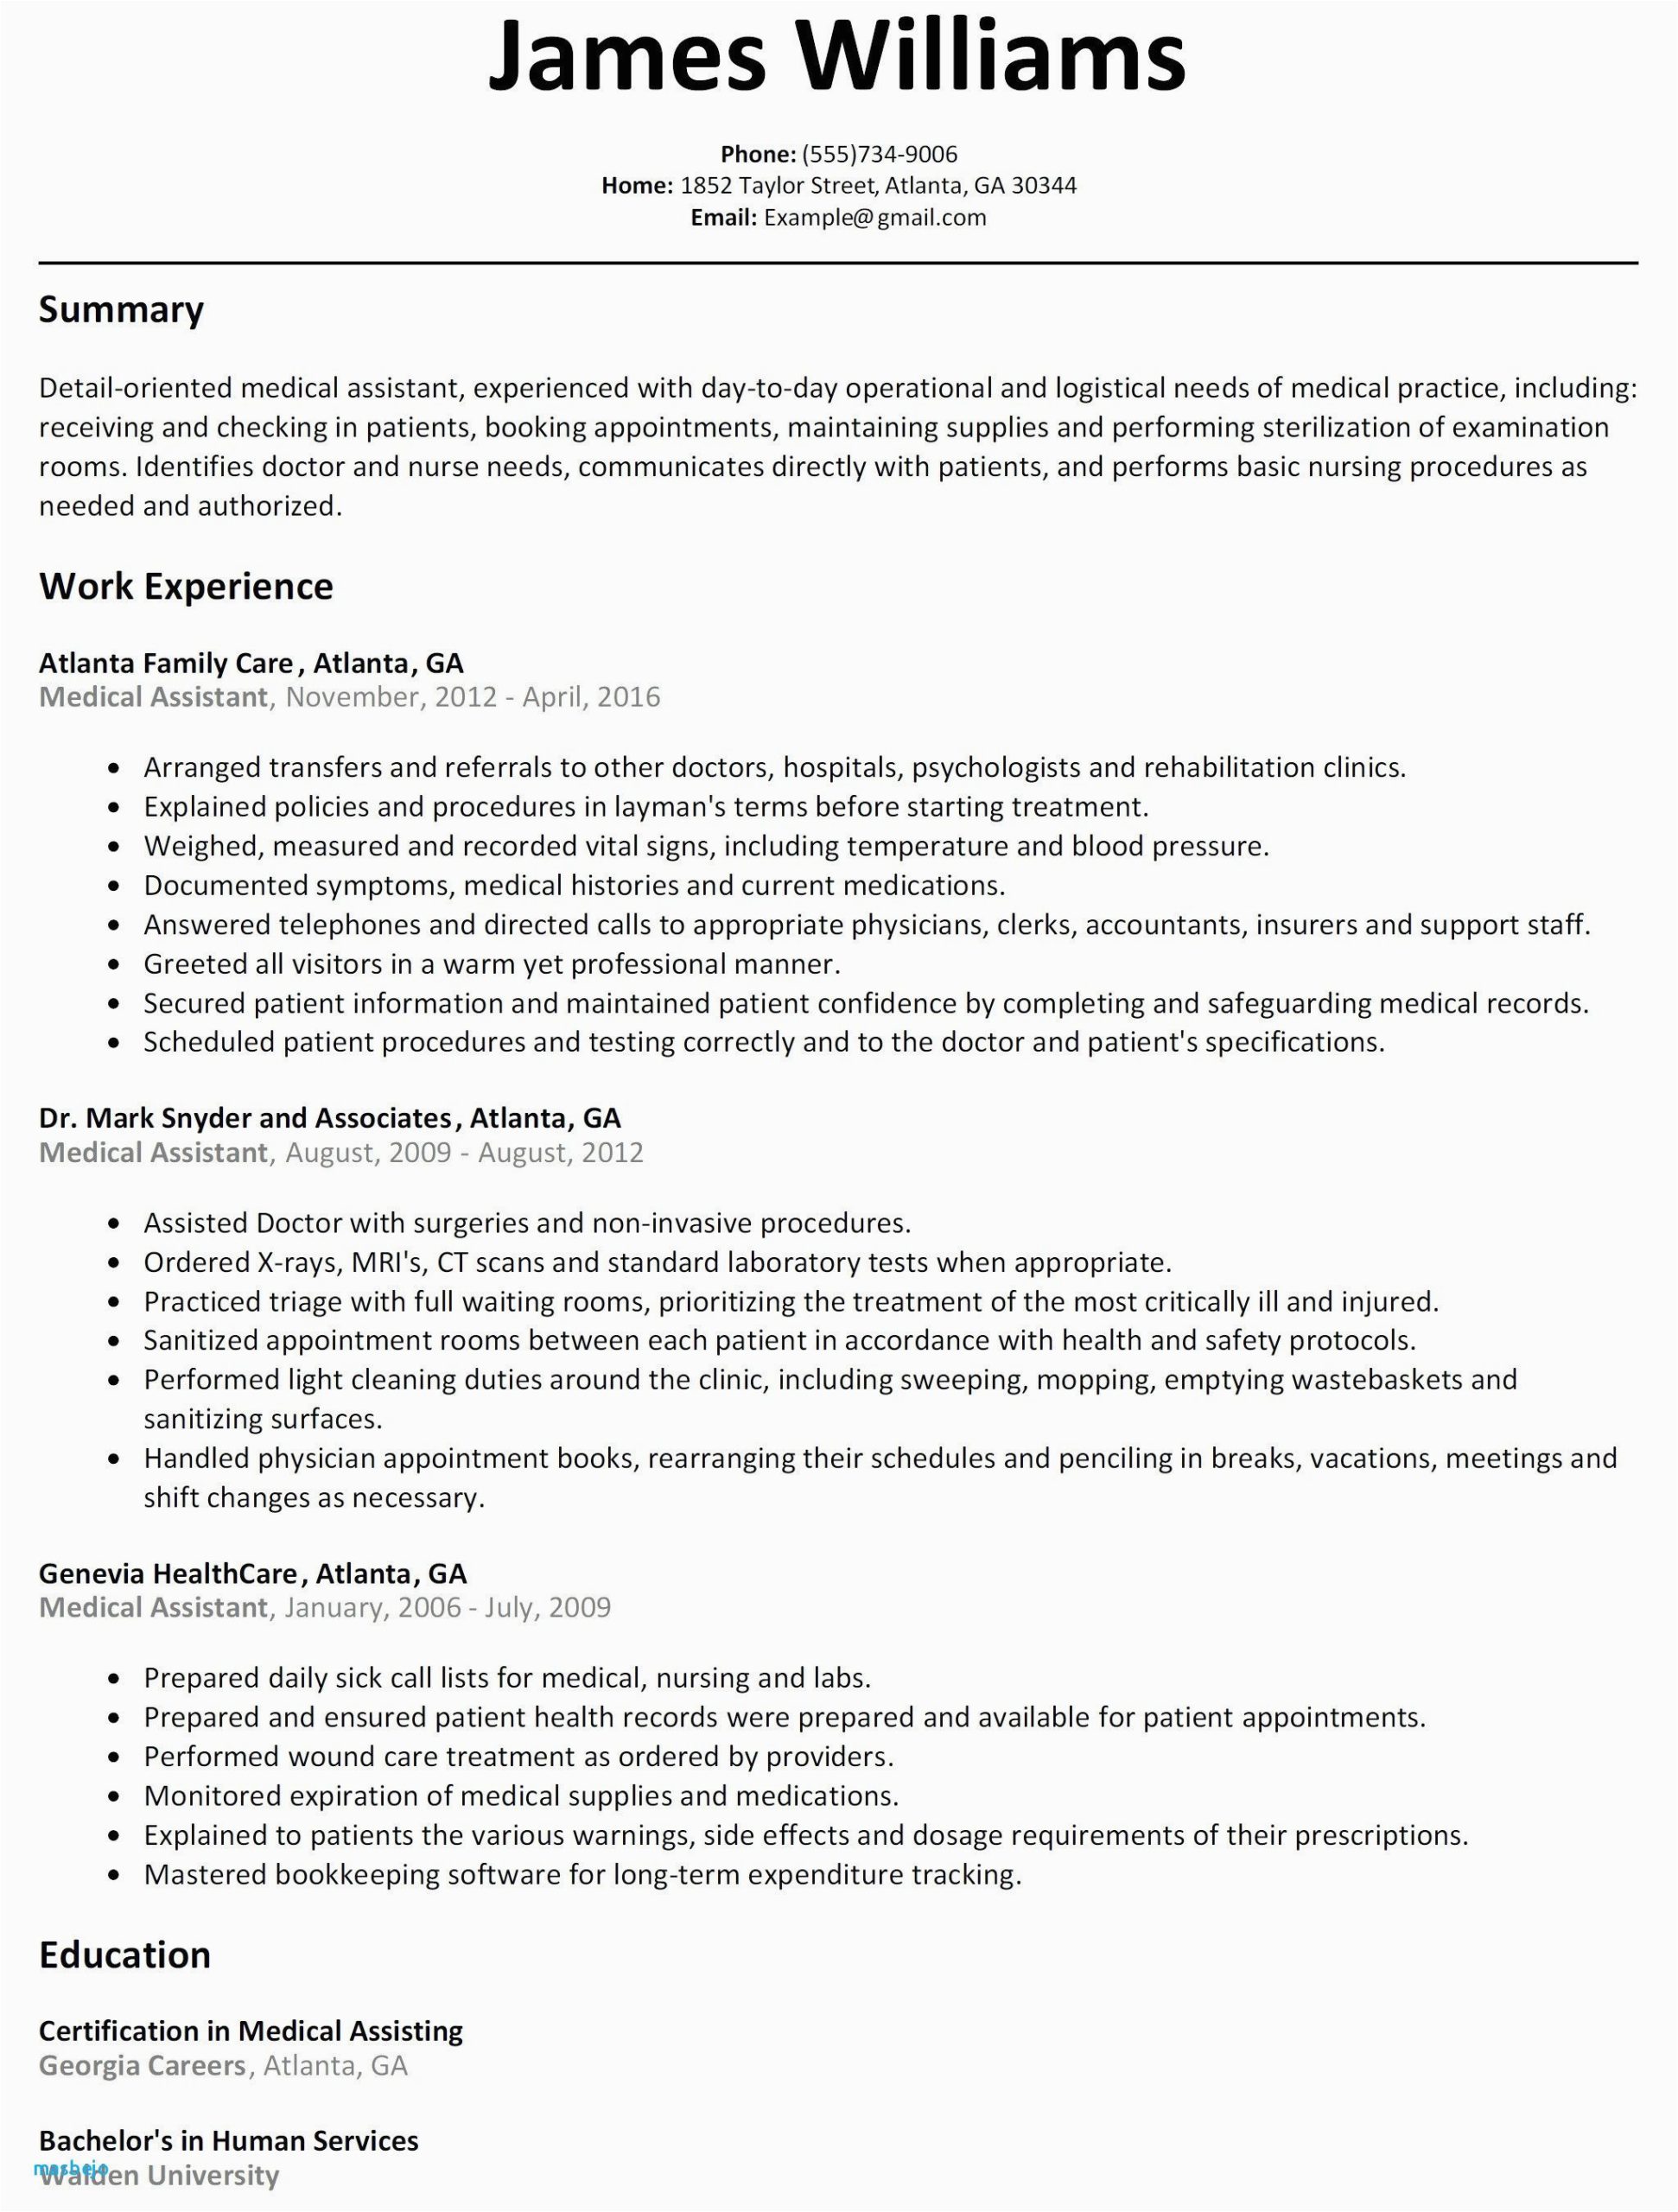 Sample Resume for Medical Office Administrator with No Experience 68 Beautiful S Resume Examples for Medical assistant with No